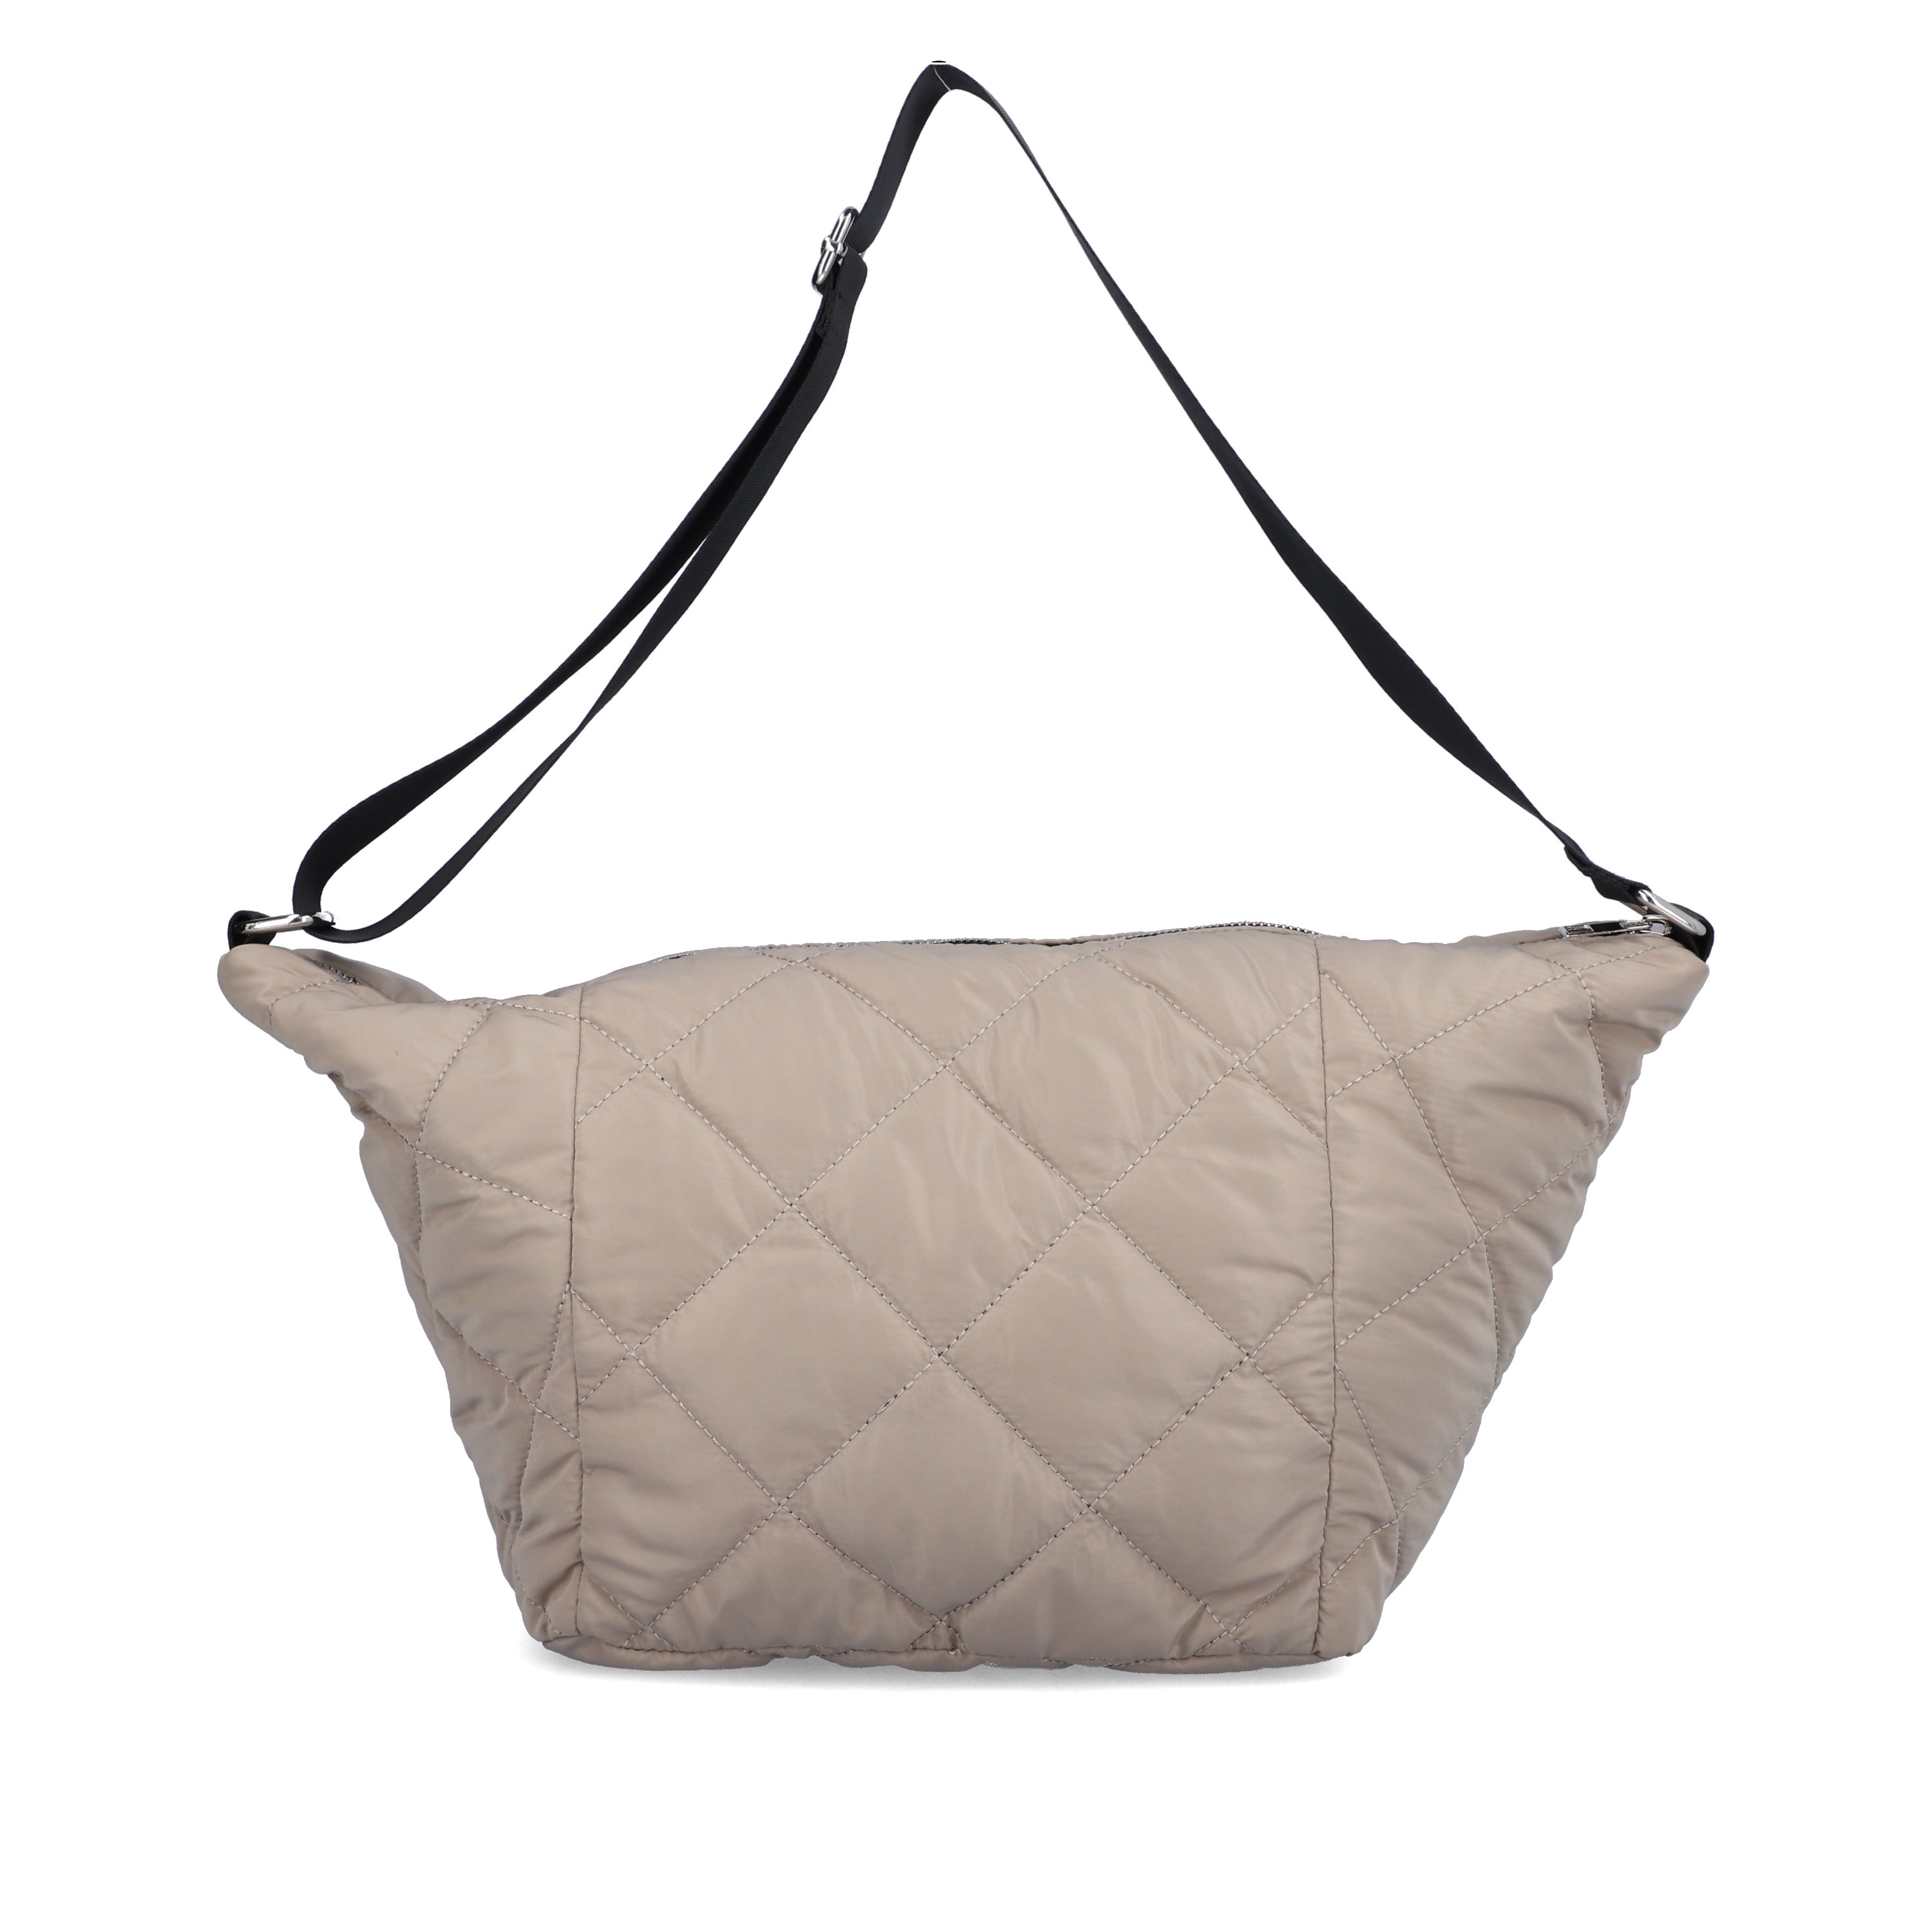 remonte women´s hip bag Q0806-62 in beige-grey made of textile with zipper from the front.